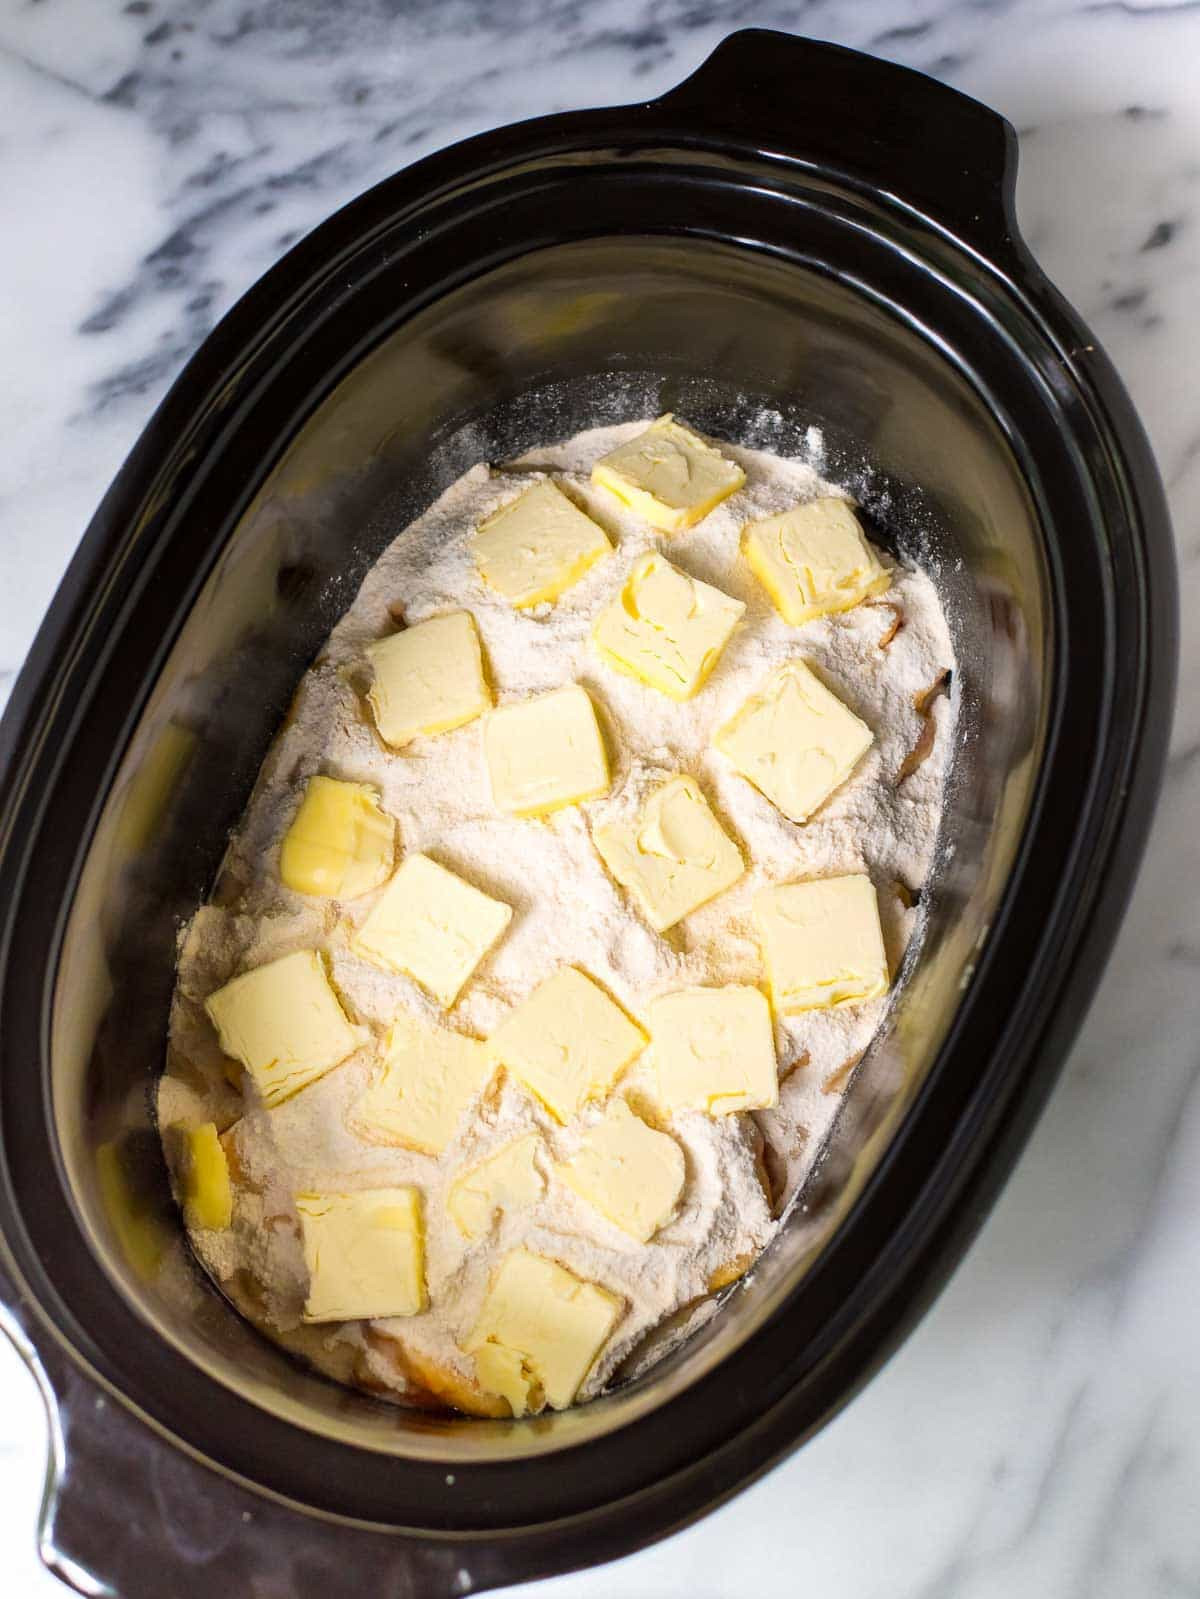 Slow Cooker Cake Recipes With Yellow Cake Mix
 Crock Pot Peach Cobbler